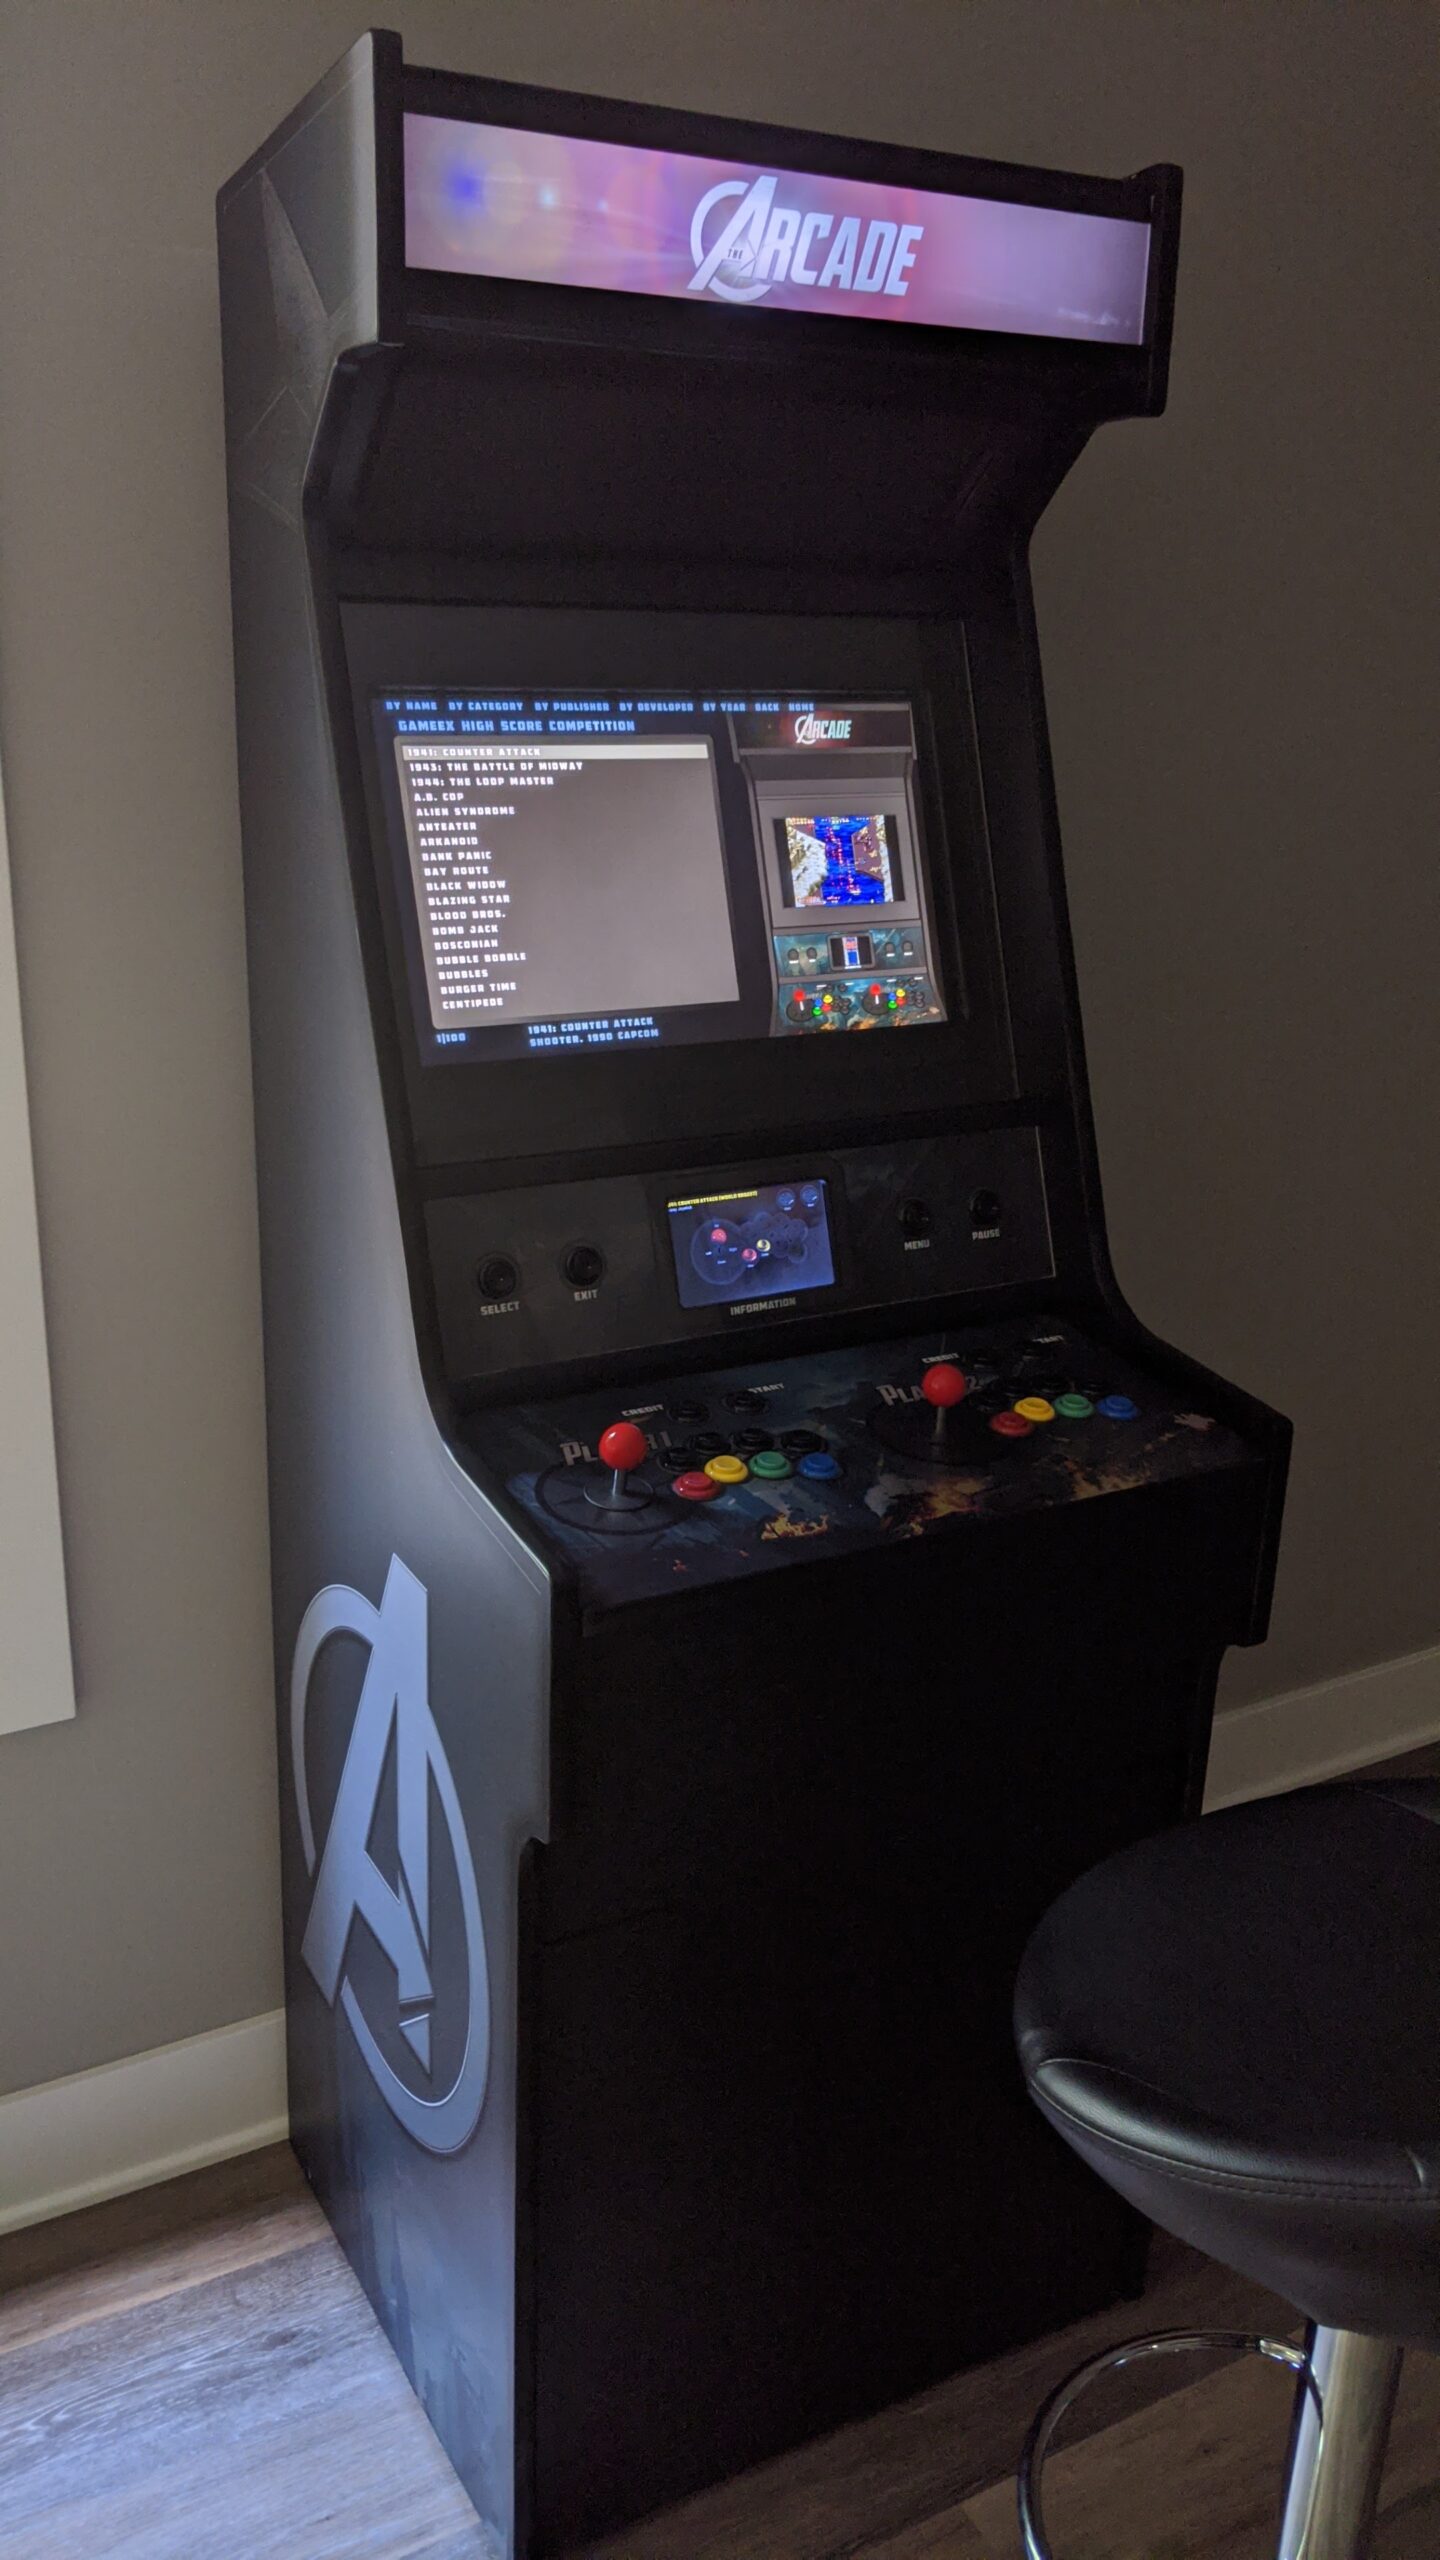 Finished arcade cabinet, powered up with the GameEx frontend visible on the screen.